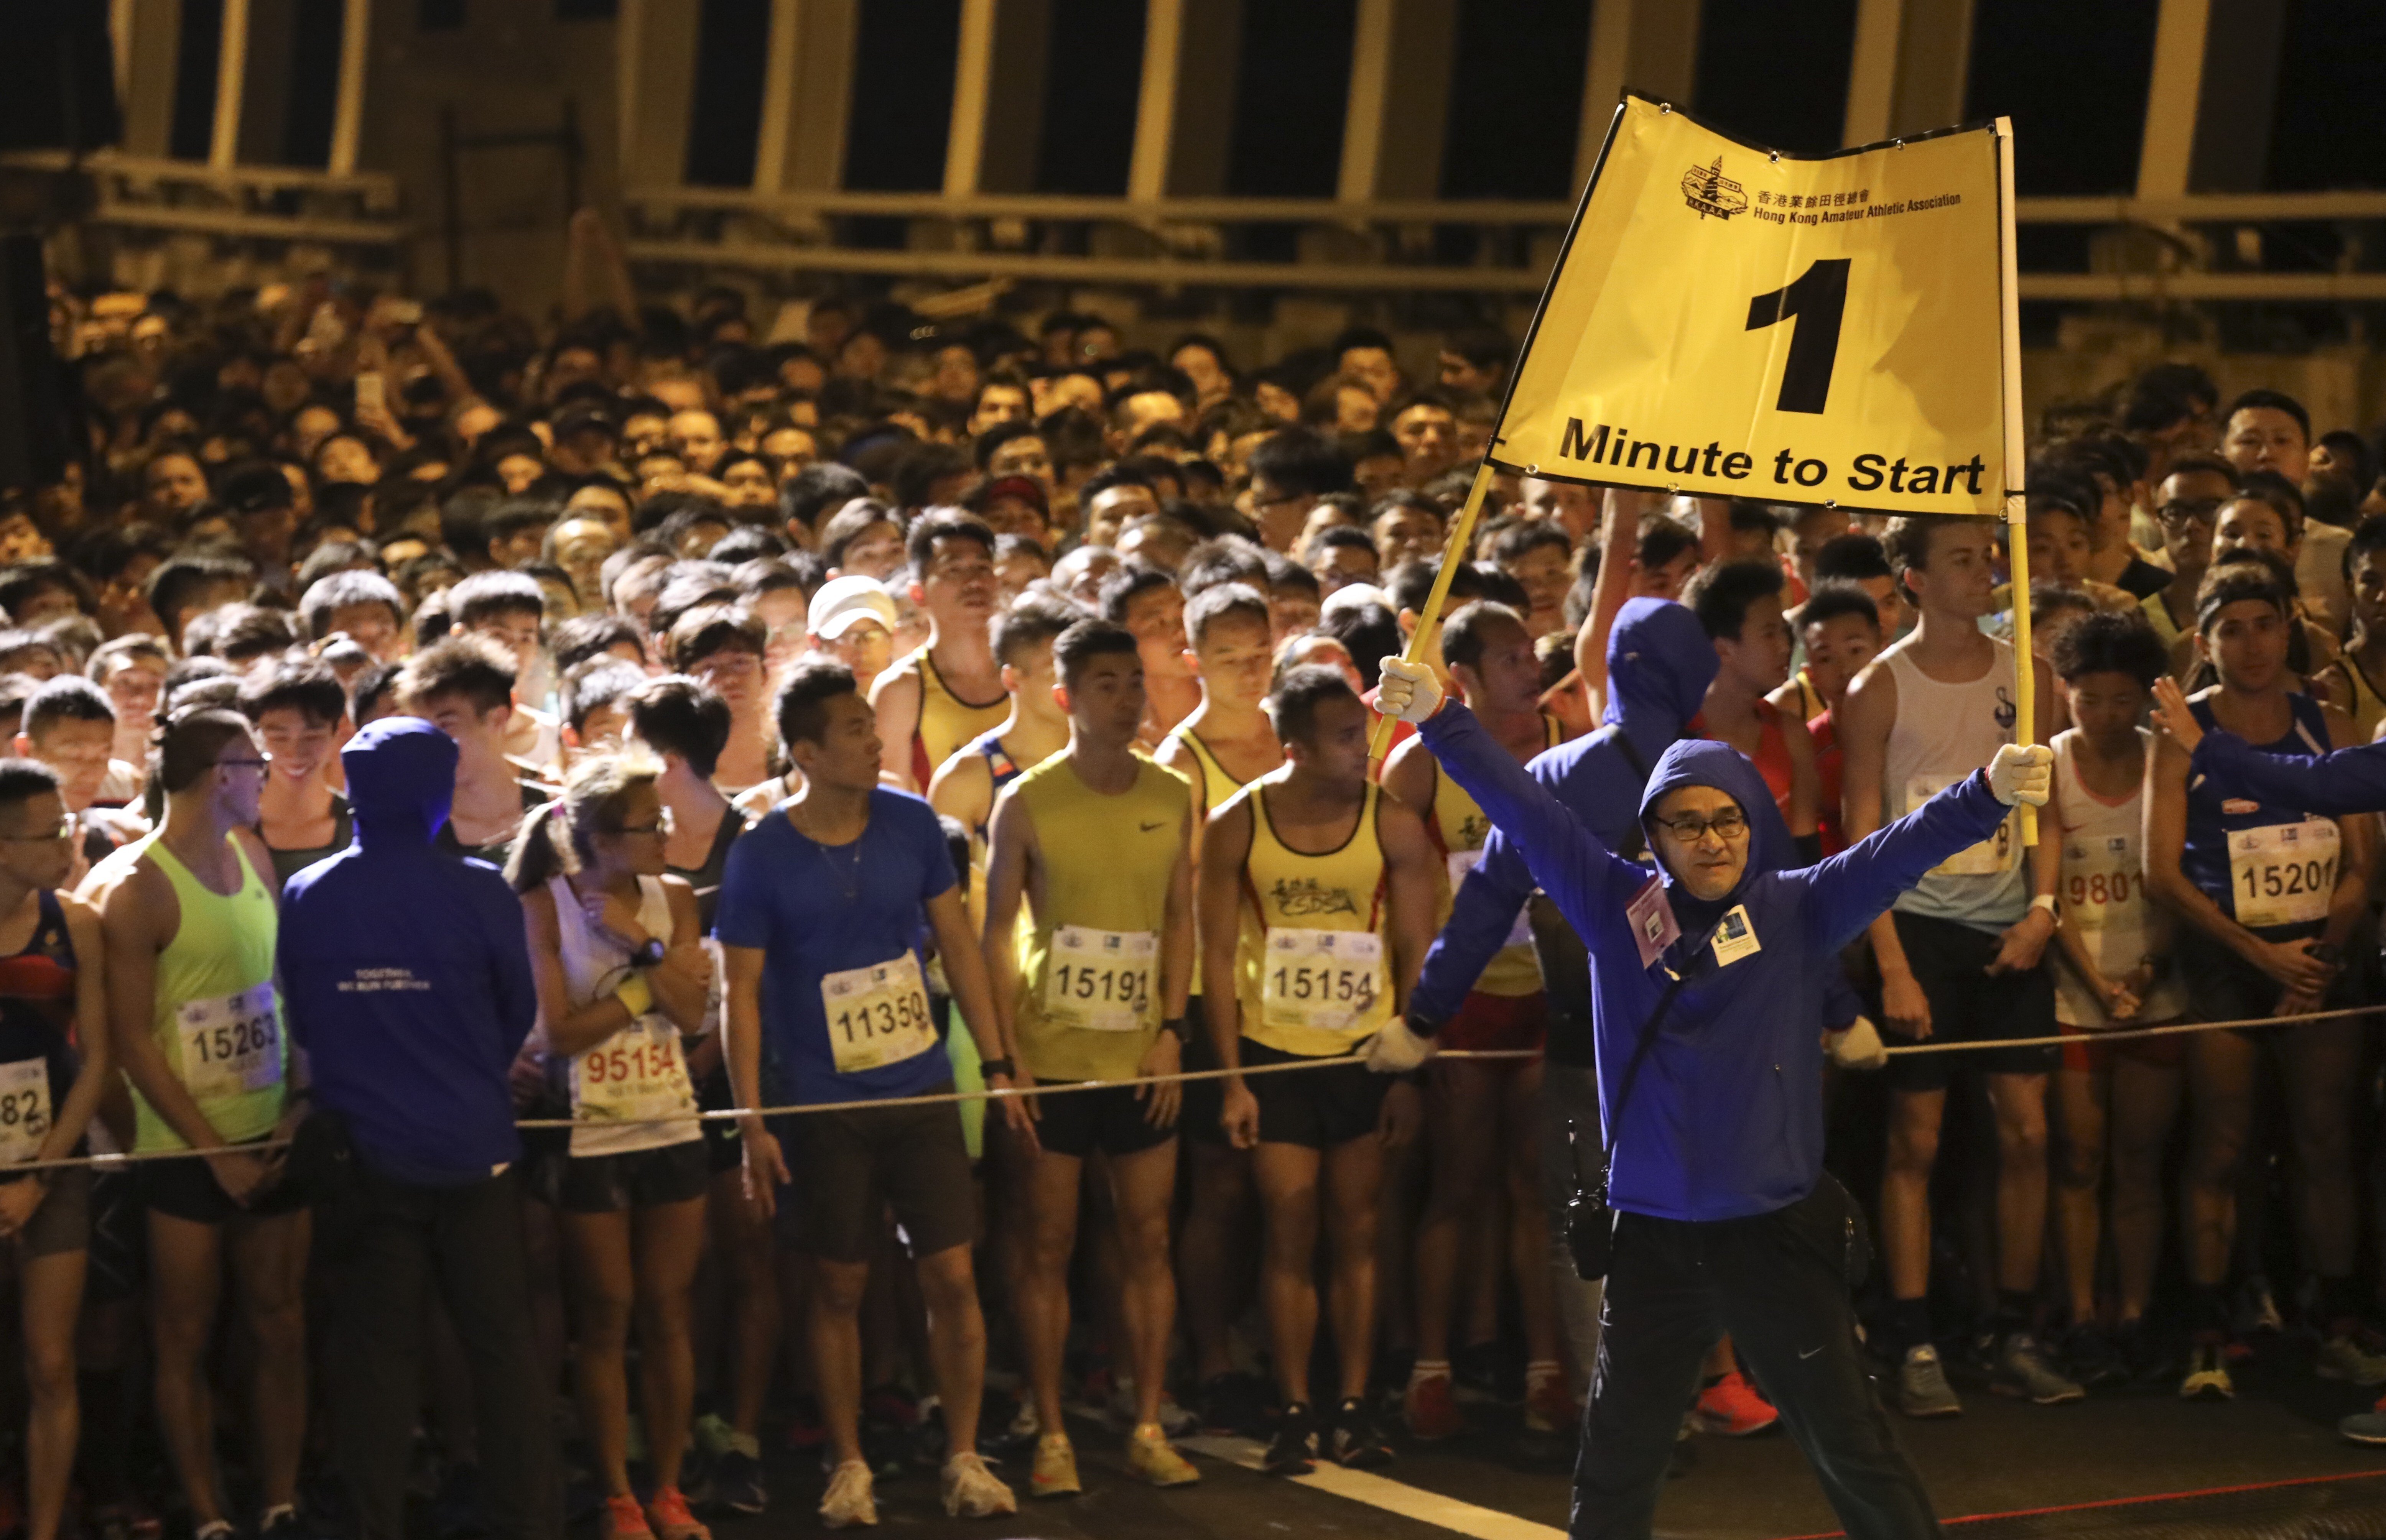 Runners prepare for the start of the 10km Standard Chartered Hong Kong Marathon run in 2019. The event is now set for a return. Photo: SCMP / Felix Wong